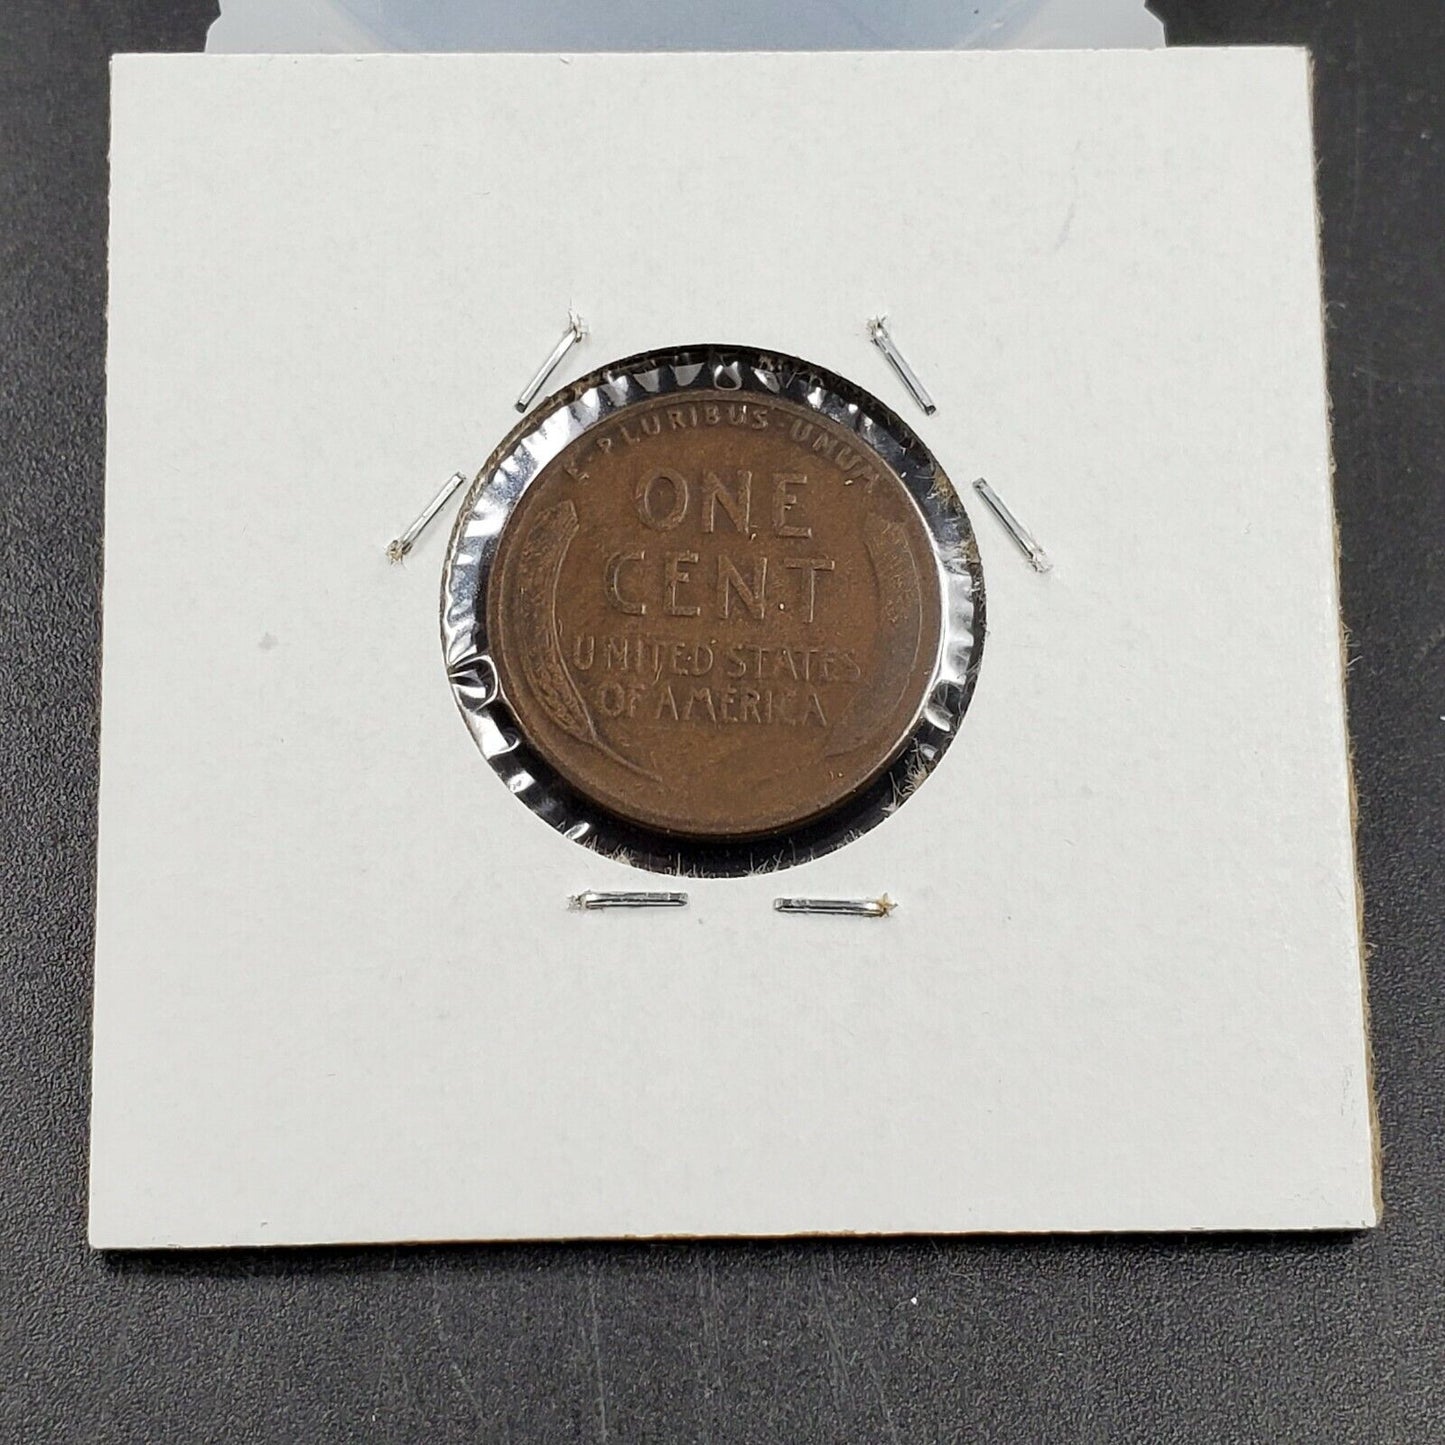 1924 s Lincoln Wheat Cent Penny Coin Circulated Die Cracks Obverse 4-7 o'clock